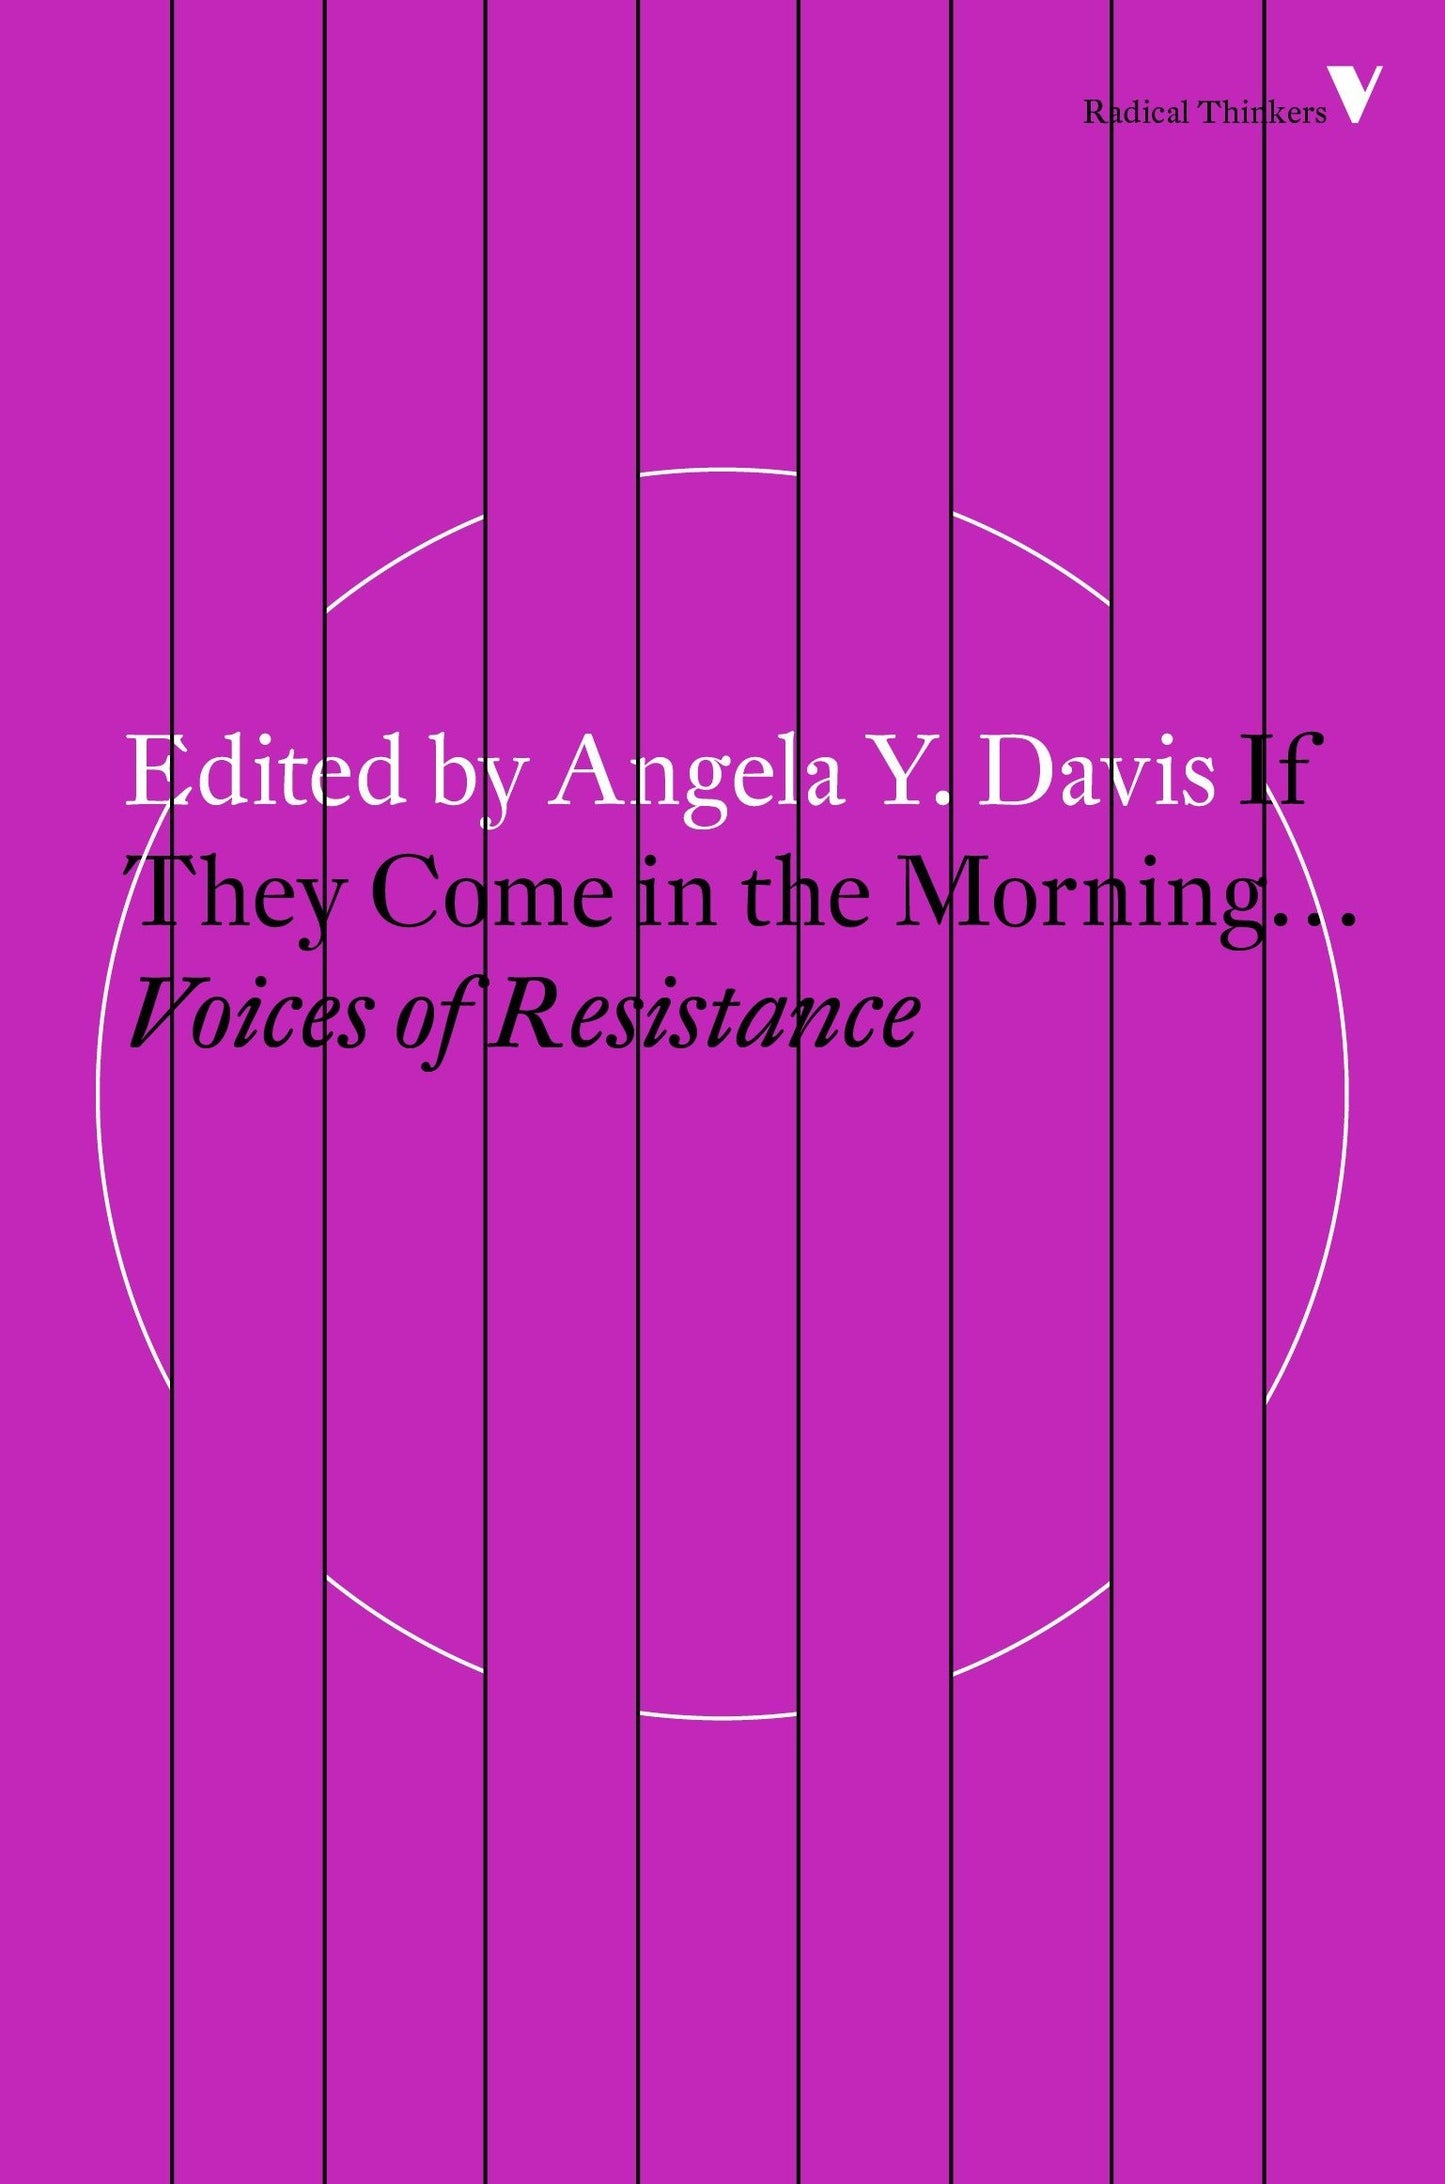 If They Come in the Morning...Voices of Resistance